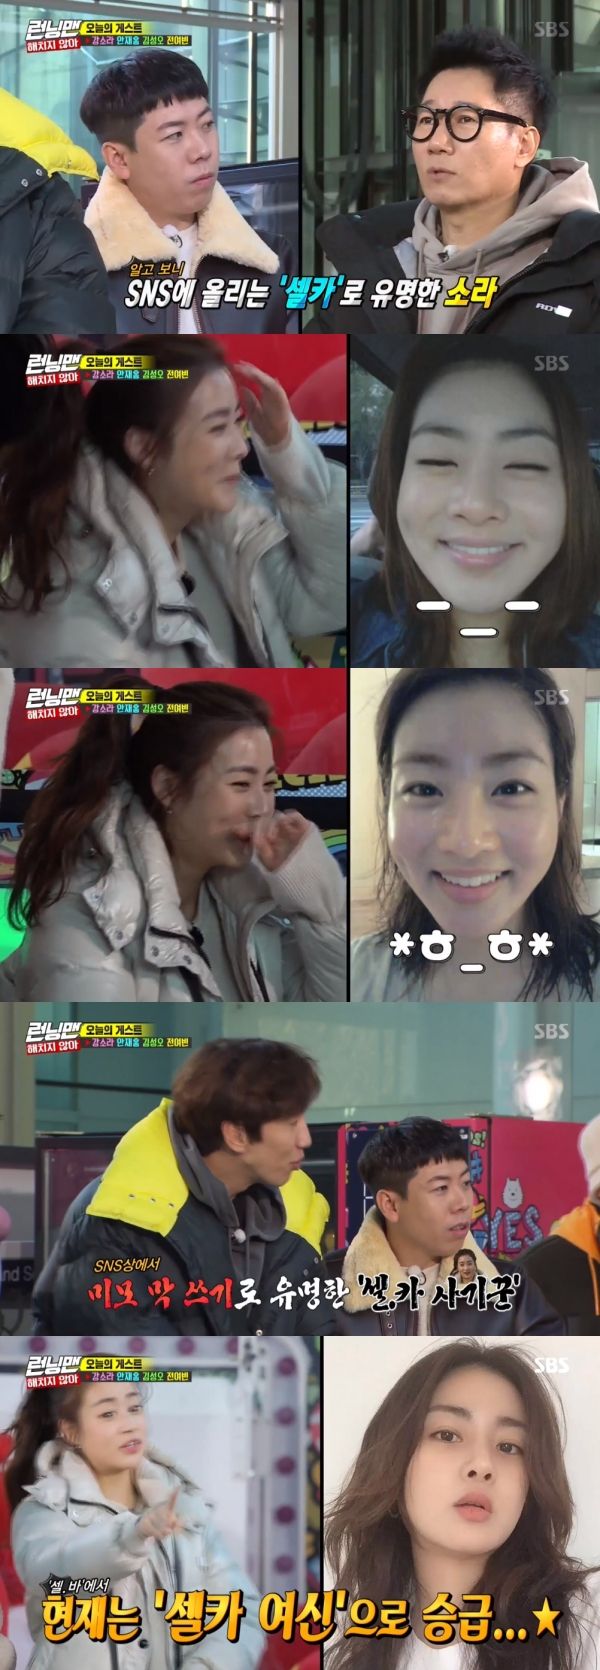 Kang So-ra recalls his days as Selfie foolOn SBS Running Man broadcasted on the 12th, Actor Kang So-ra of the movie Do not Hazard mentioned his selfie.On the day of the broadcast, Yoo Jae-Suk introduced Kang So-ras social network service selfie photo, saying, Mr. Sora is very...For fans, the nickname is called Selfie fool, Yoo Jae-Suk added.Kang So-ra looked like he was laughing at his photo. It was a long time ago, he explained.Kim Jong-guk, who saw Kang So-ras photo, said, Did you take it? We take it when you try to make fun of it. Ji Seok-jin added, Is not it a normal photo to throw this away?Now I take a good picture, Jeon said in a recent photo.